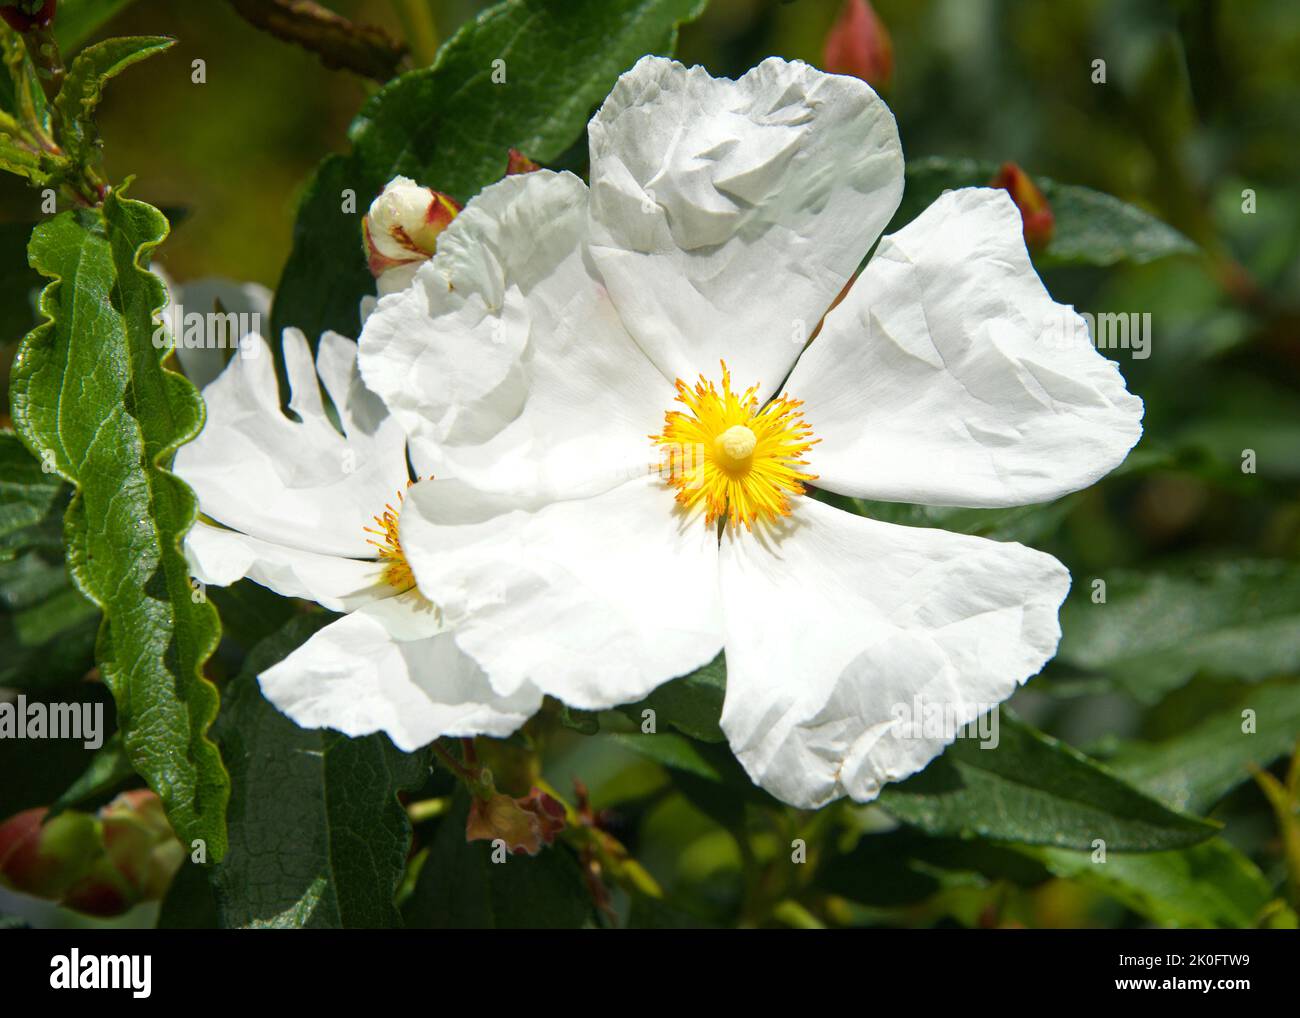 Romneya, a genus of flowering plants belonging to the poppy family. They are known commonly as Matilija poppies or tree poppies, native to California Stock Photo